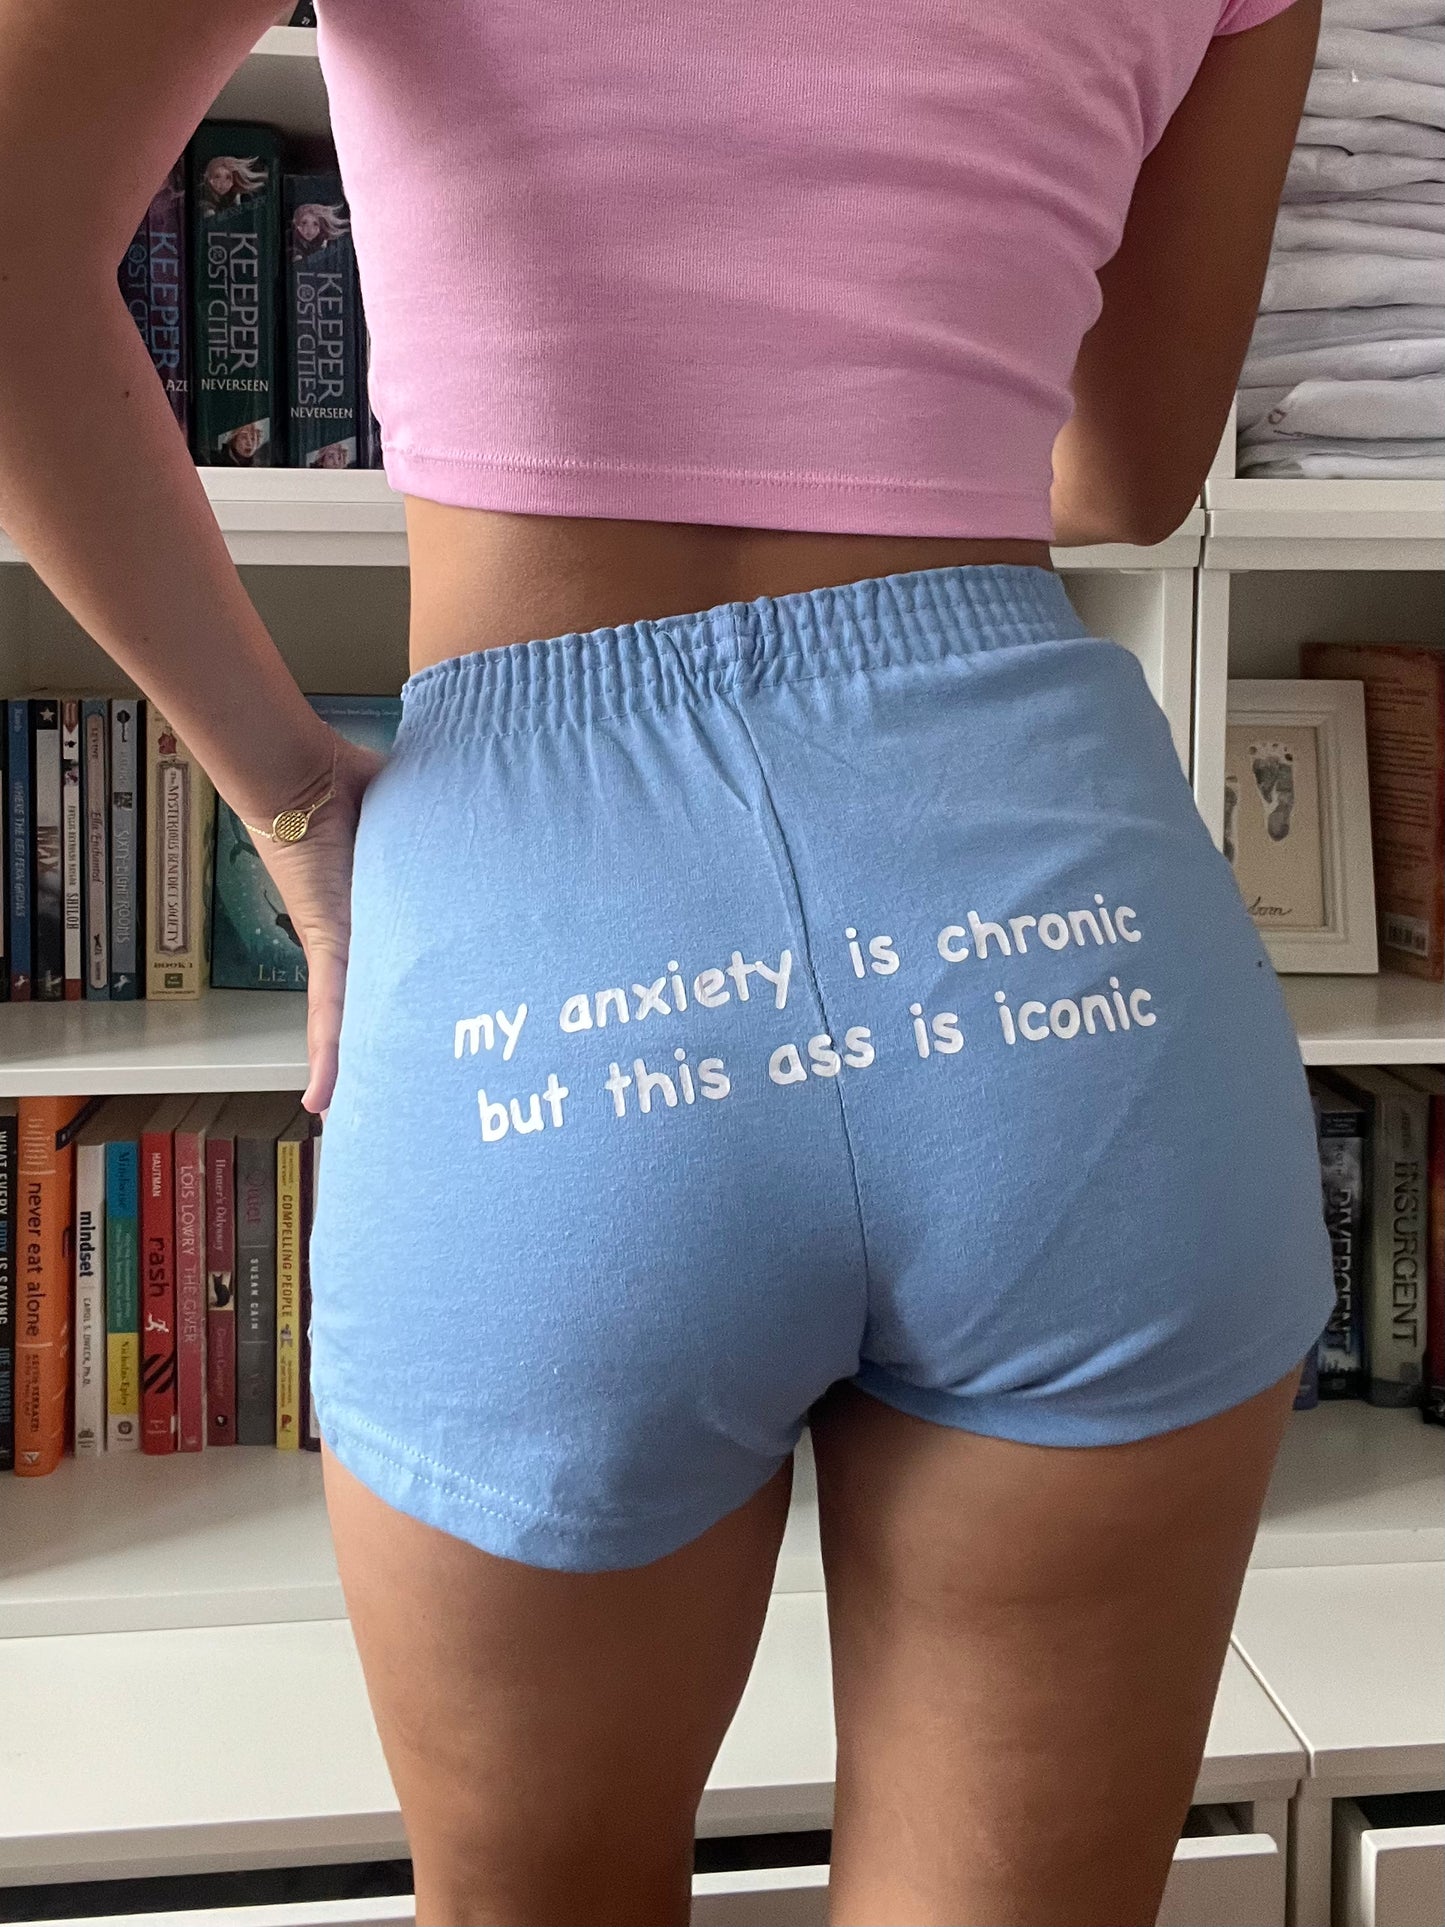 My Anxiety Is Chronic But This Ass Is Iconic Shorts